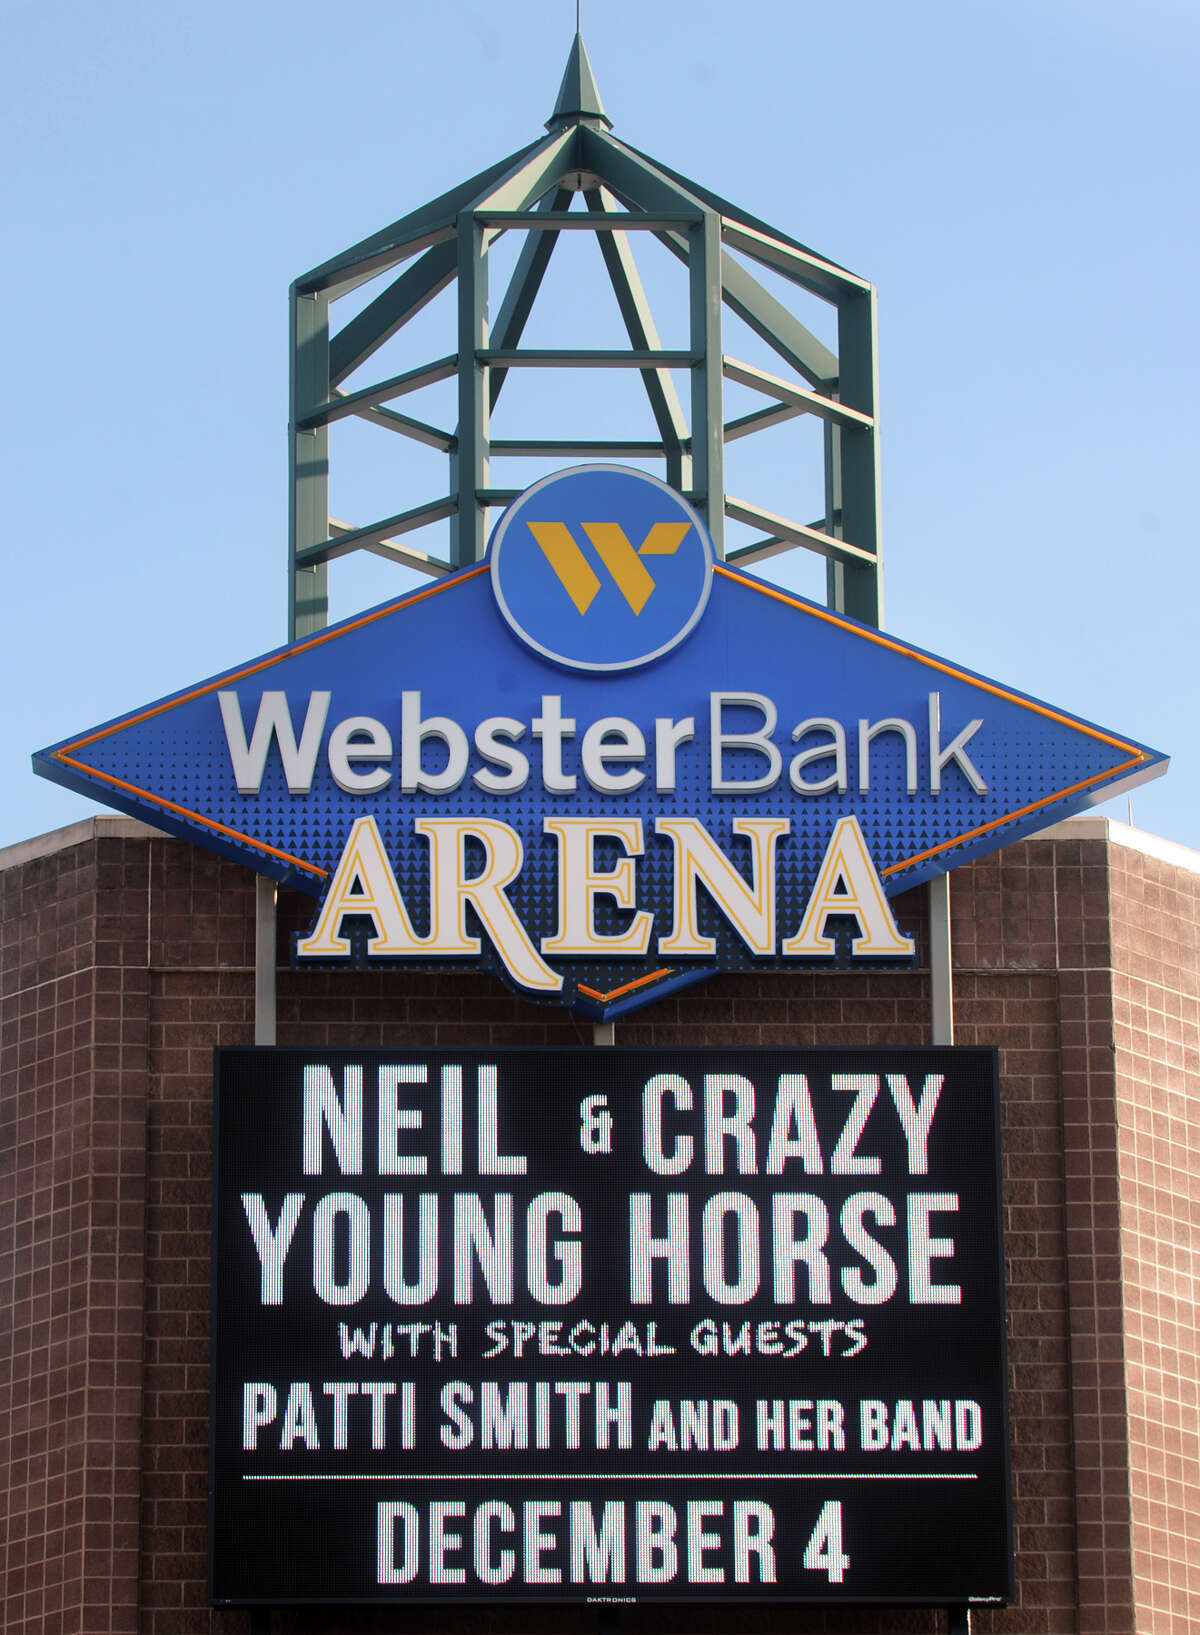 Neil Young & Crazy Horse will headline a concert at the Webster Bank Arena, in Bridgeport, Conn. on Tuesday.